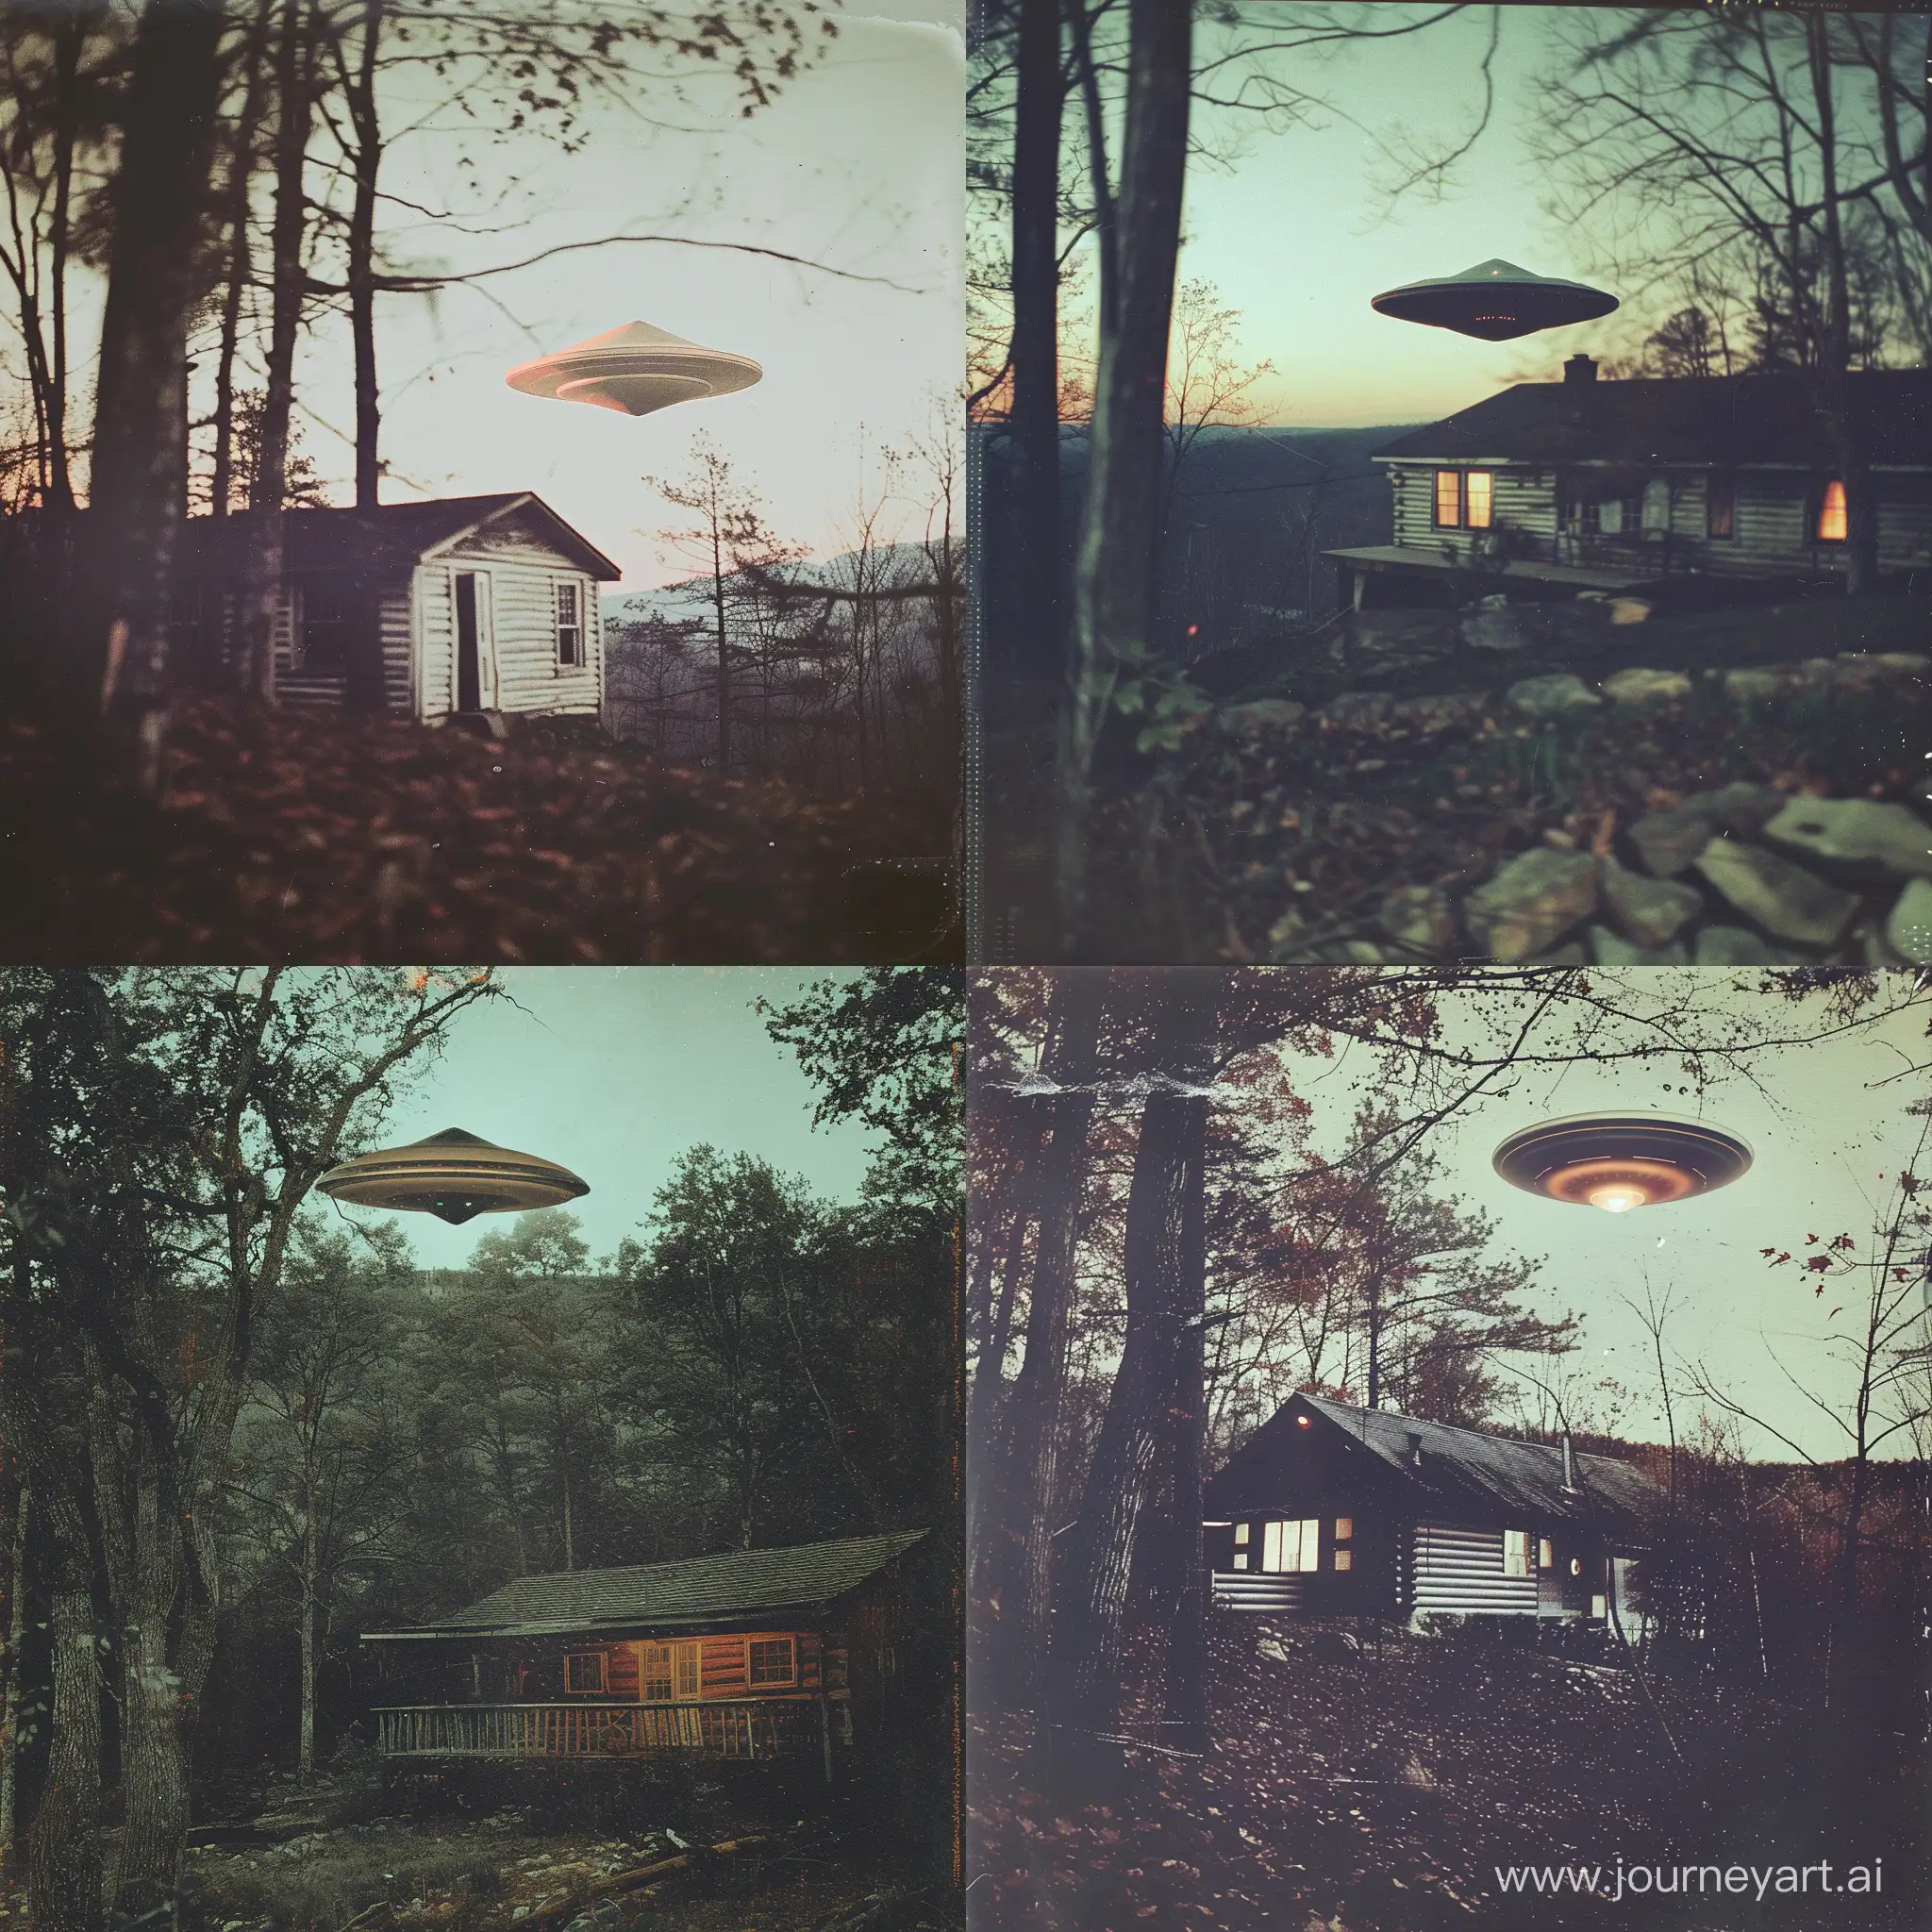 Grainy 90s VHS footage of a triangle UFO floating over a cabin in the woods at dusk.